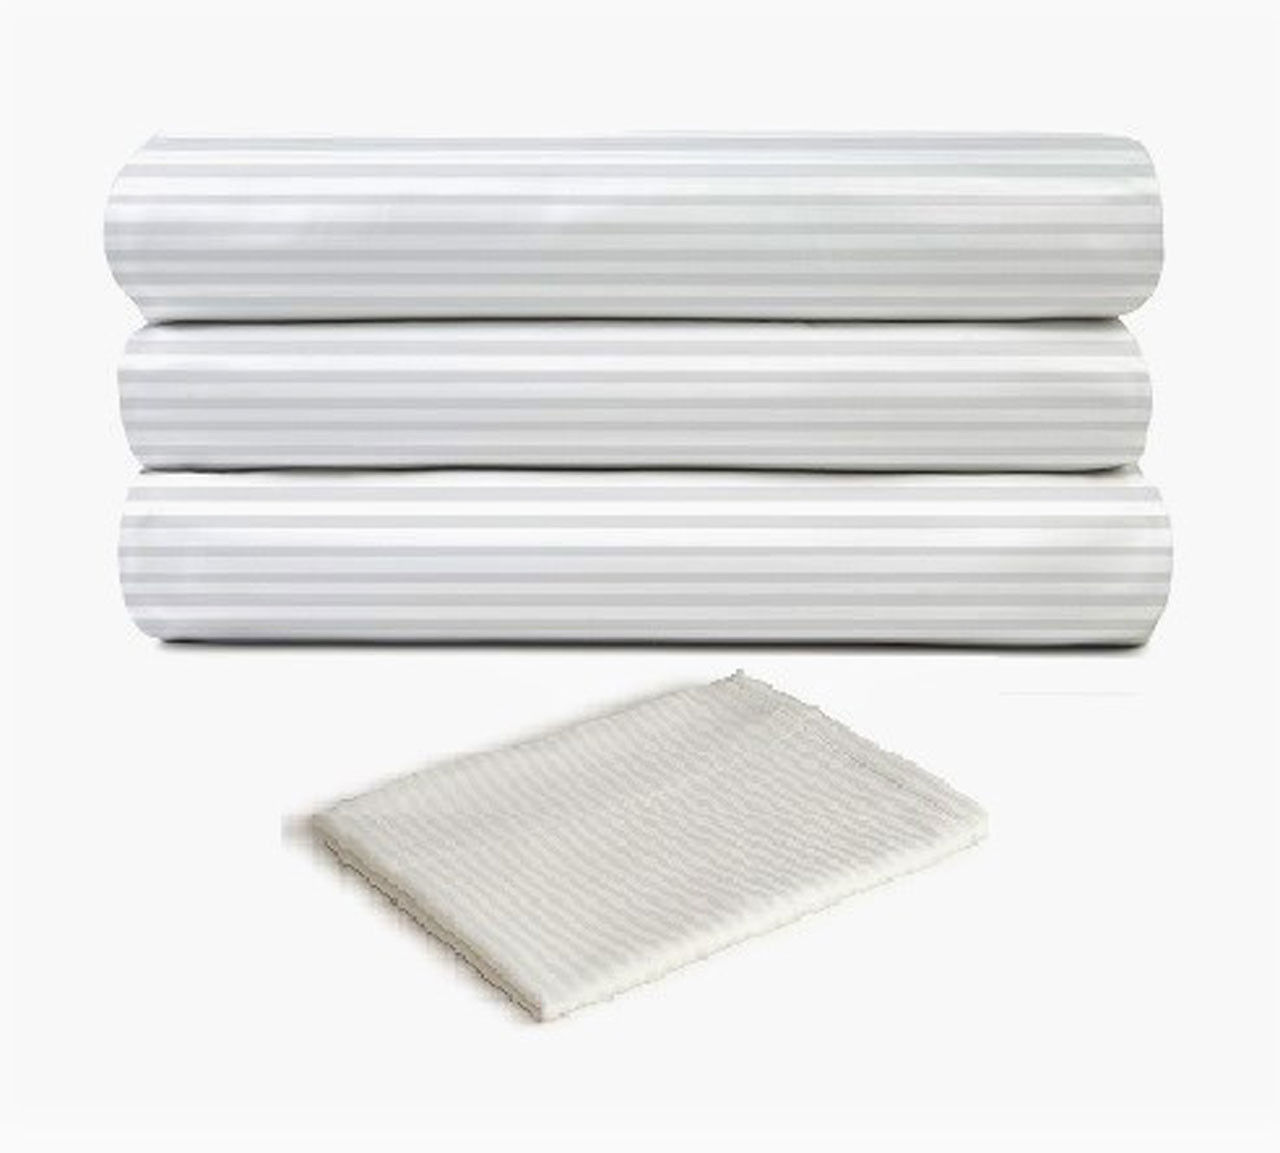 Are hotel pillowcases wholesale by Golden Mills available in different pocket sizes?